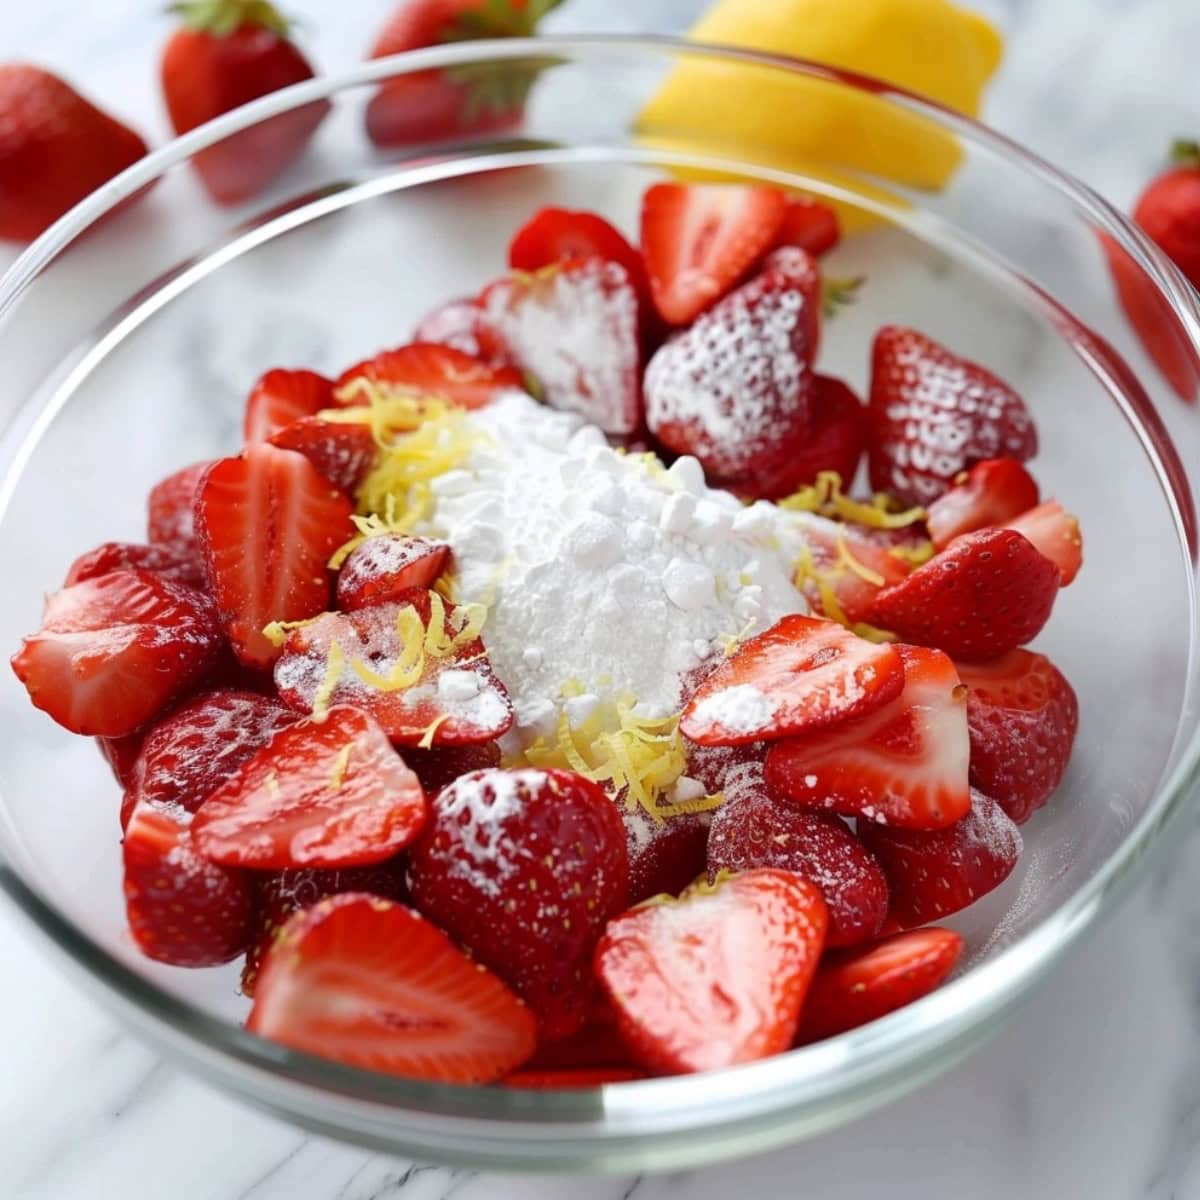 Sliced strawberries with cornstarch and lemon zest in a glass bowl.